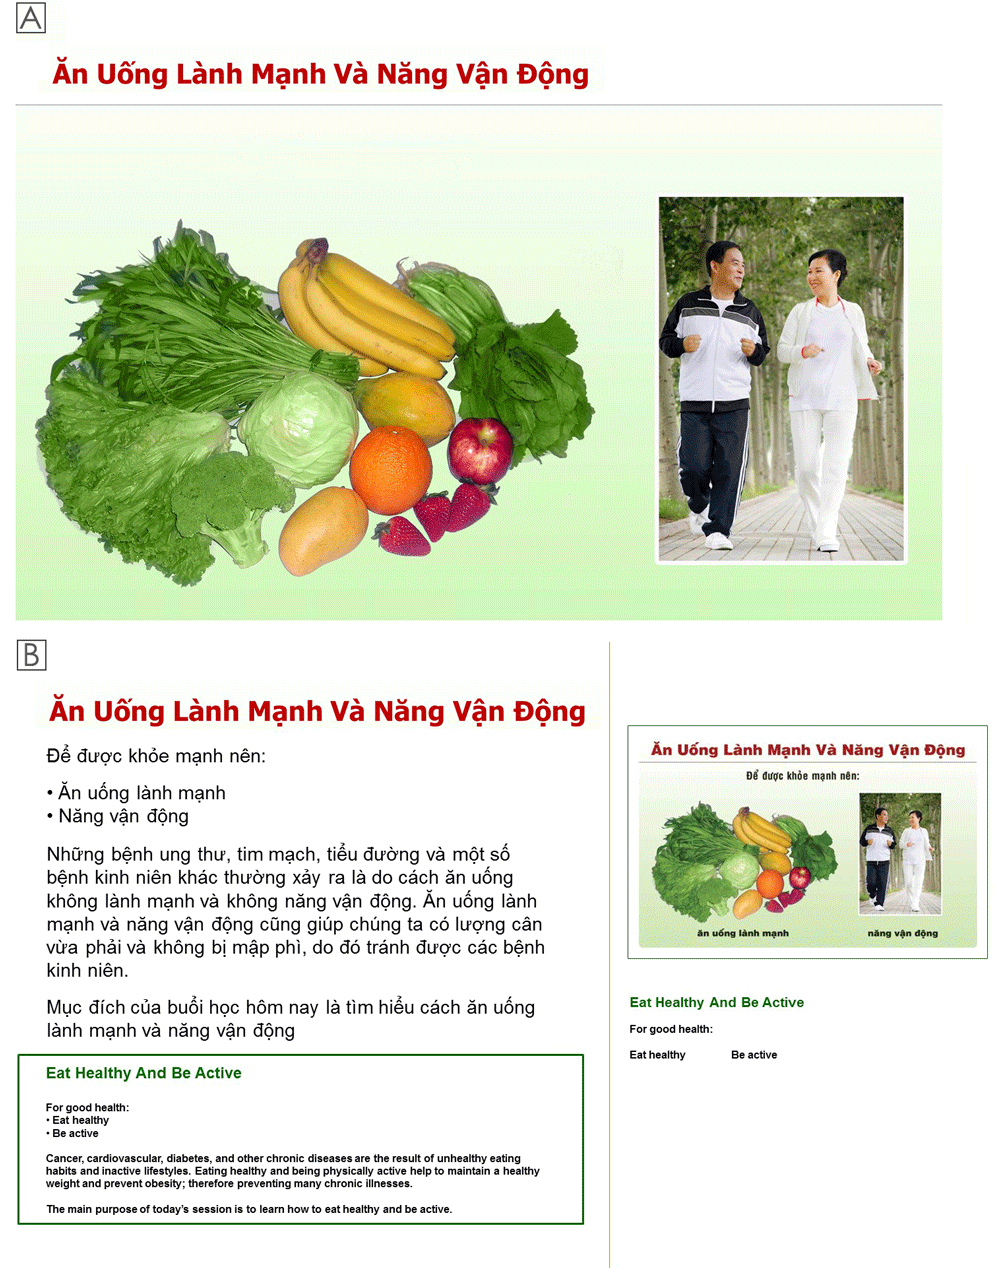 Culturally and linguistically appropriate educational materials developed for delivery by lay health workers to Vietnamese Americans aged 50 to 74 in an intervention designed to increase healthy eating and physical activity, Santa Clara County, California, 2008–2013. A, Participant-facing page of a flip chart. B, Lay health worker–facing page.